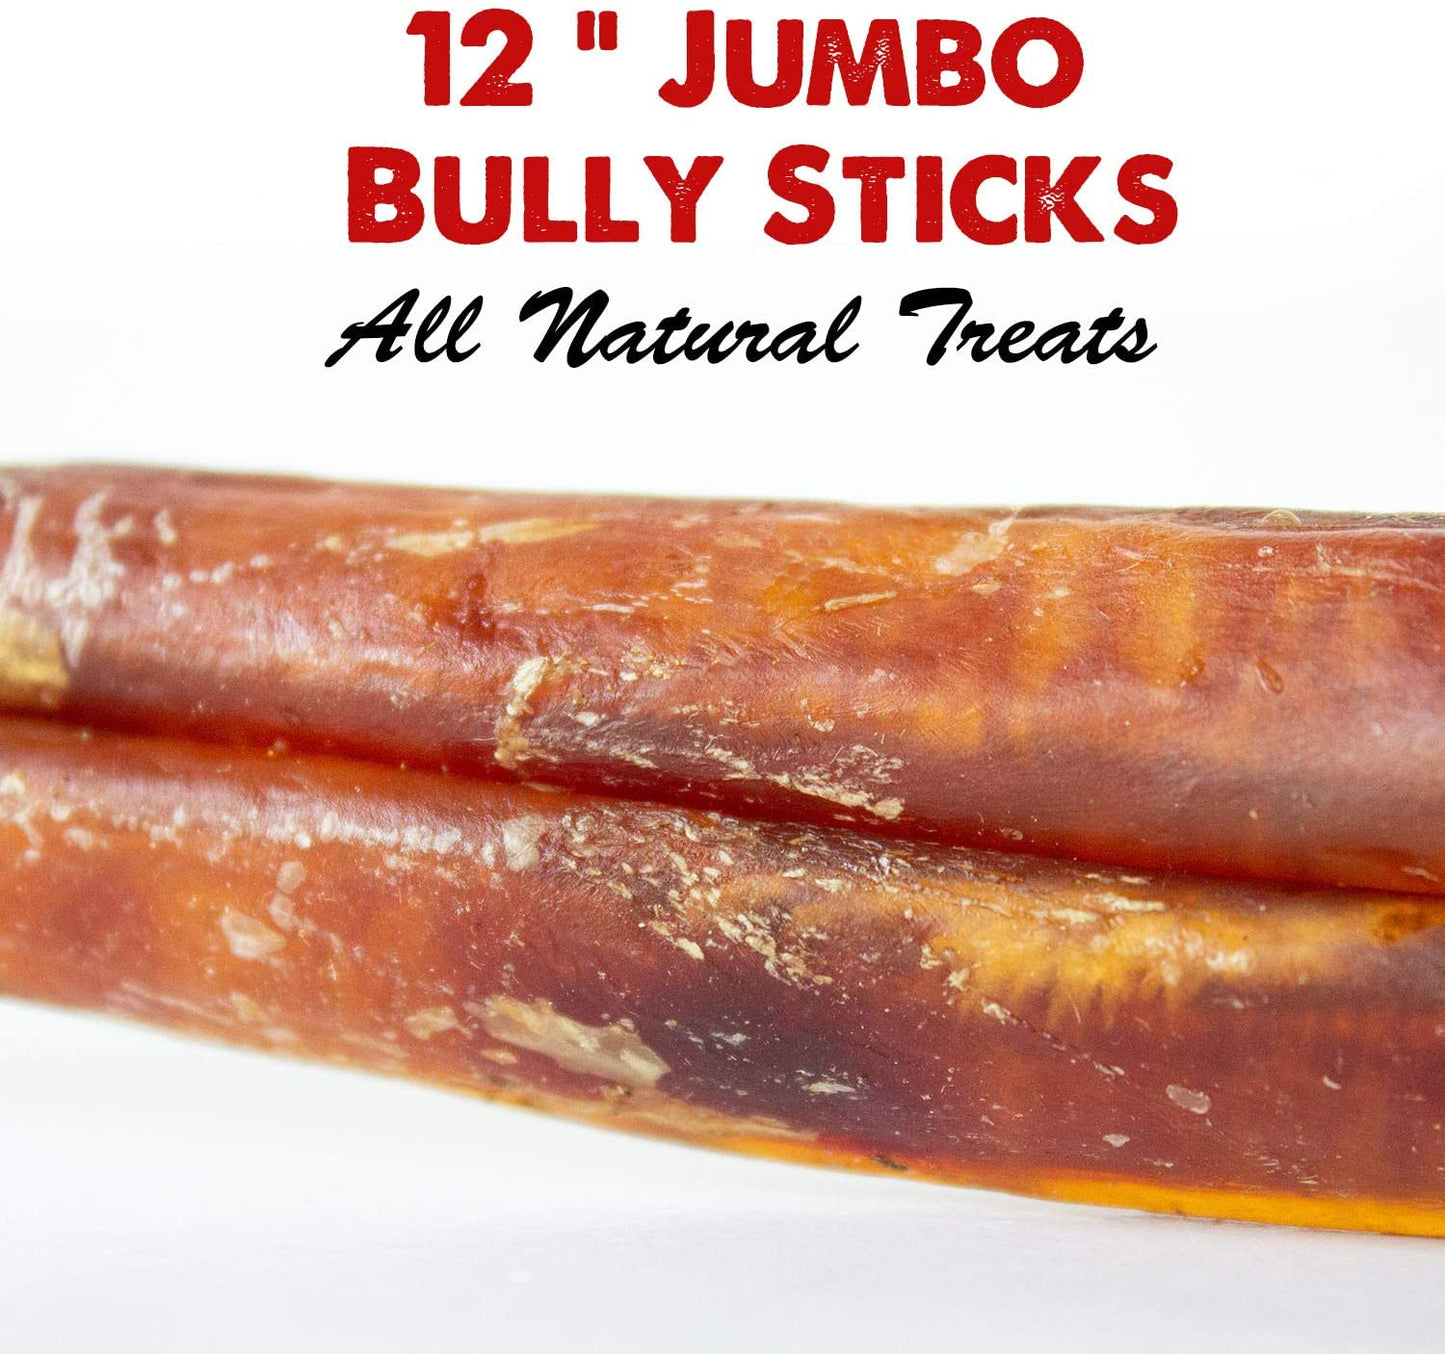 6 and 12 inch Jumbo Extra Thick USA Bully Sticks for Dogs (Bulk Bags by Weight) - All Natural American Dog Dental Chew Treats, High in Protein, Great Alternative to Rawhides